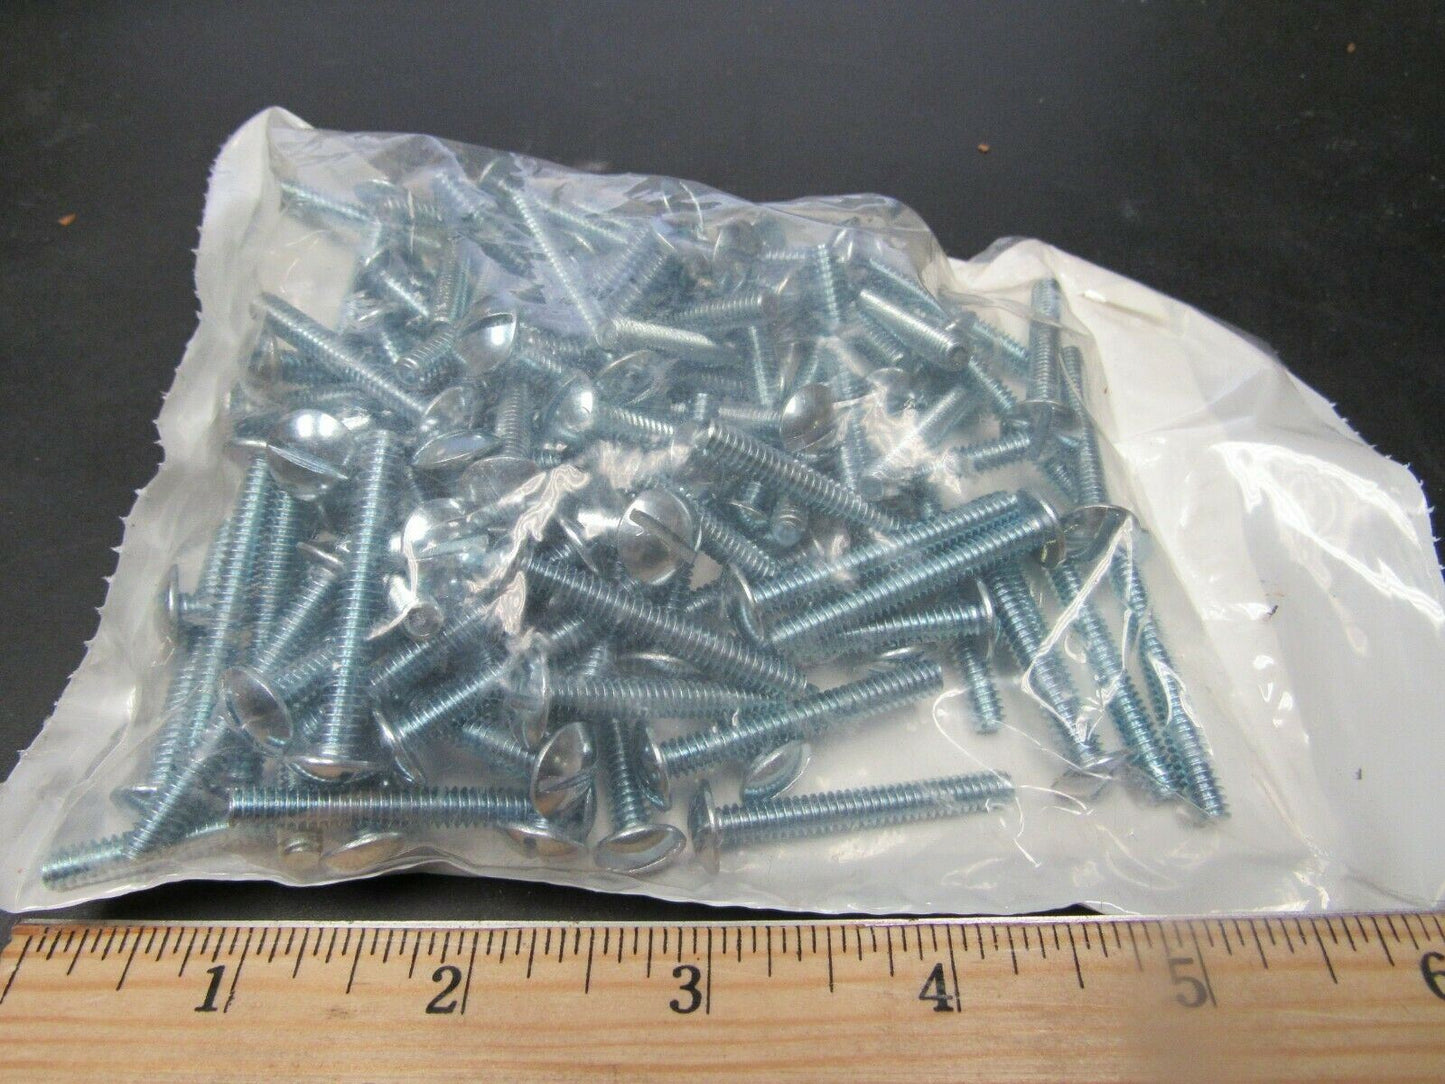 (100) Fabory #10-24 Machine Screw Truss Slotted Carbon Steel ZP, 1-1/2" (184237186900-BT38)